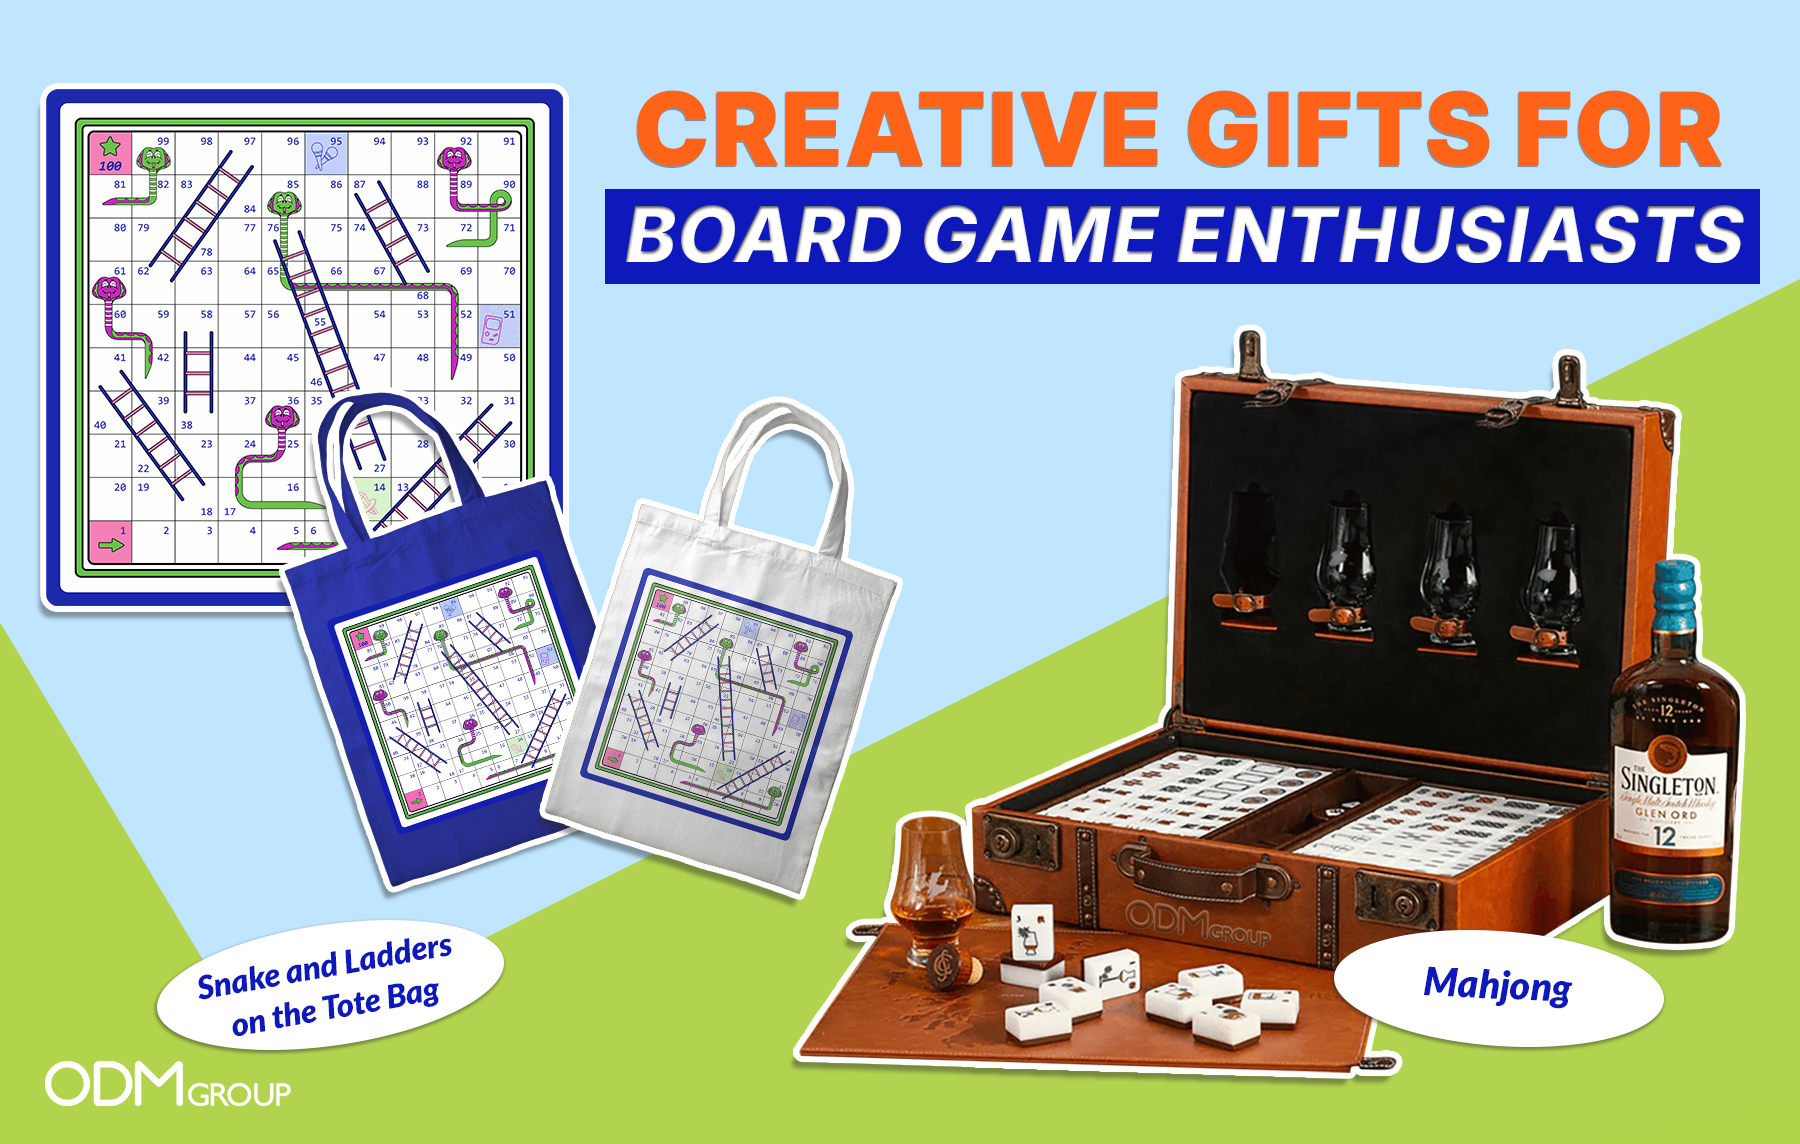 Creative gifts for board game enthusiasts including tote bags and a mahjong set.